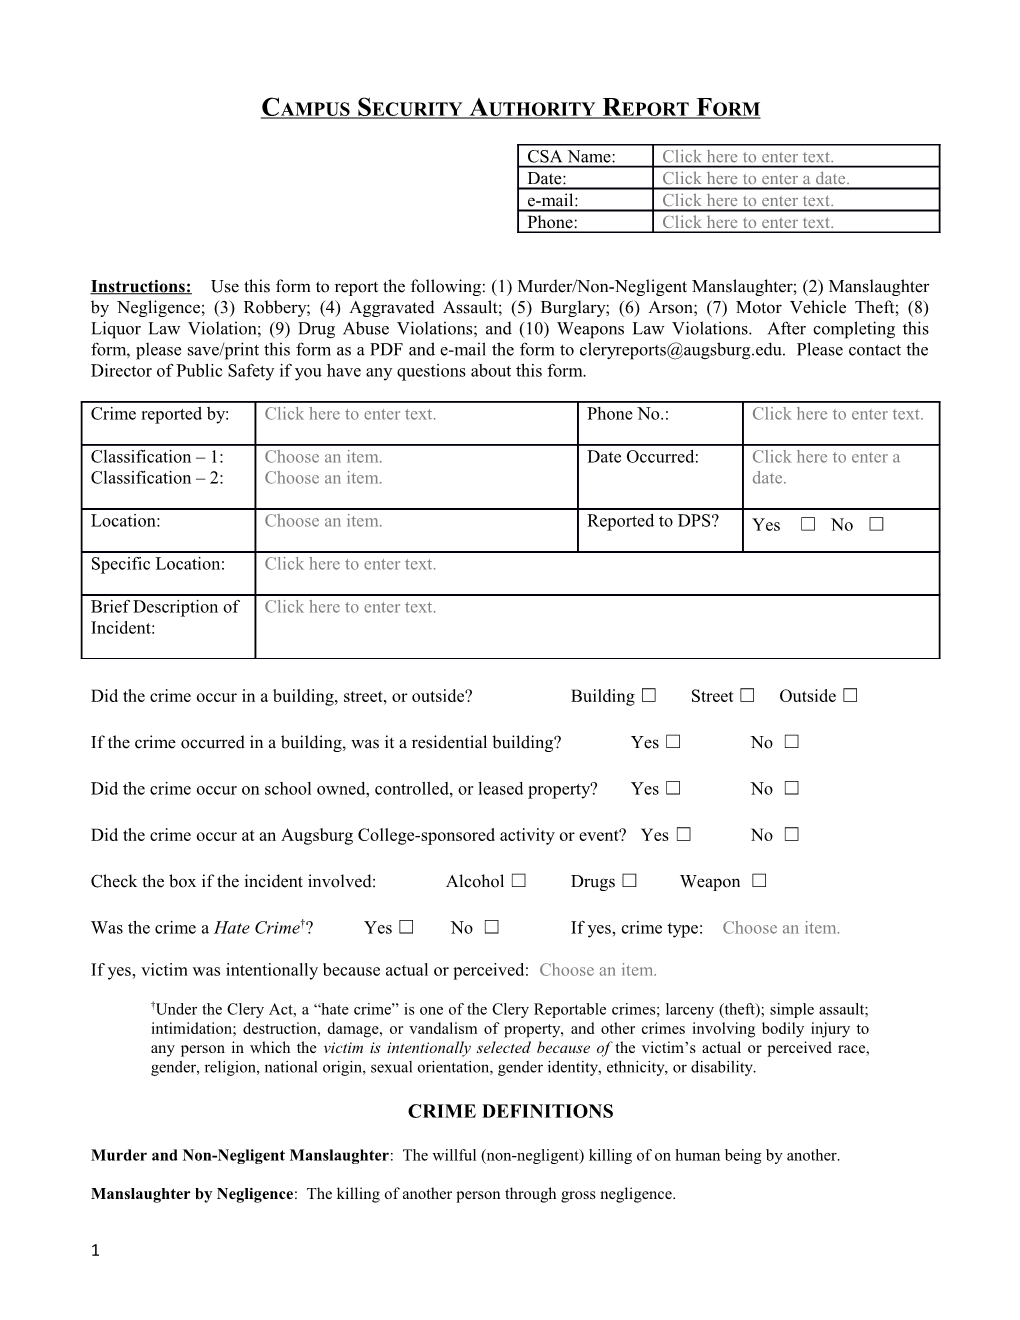 Campus Security Authority Report Form